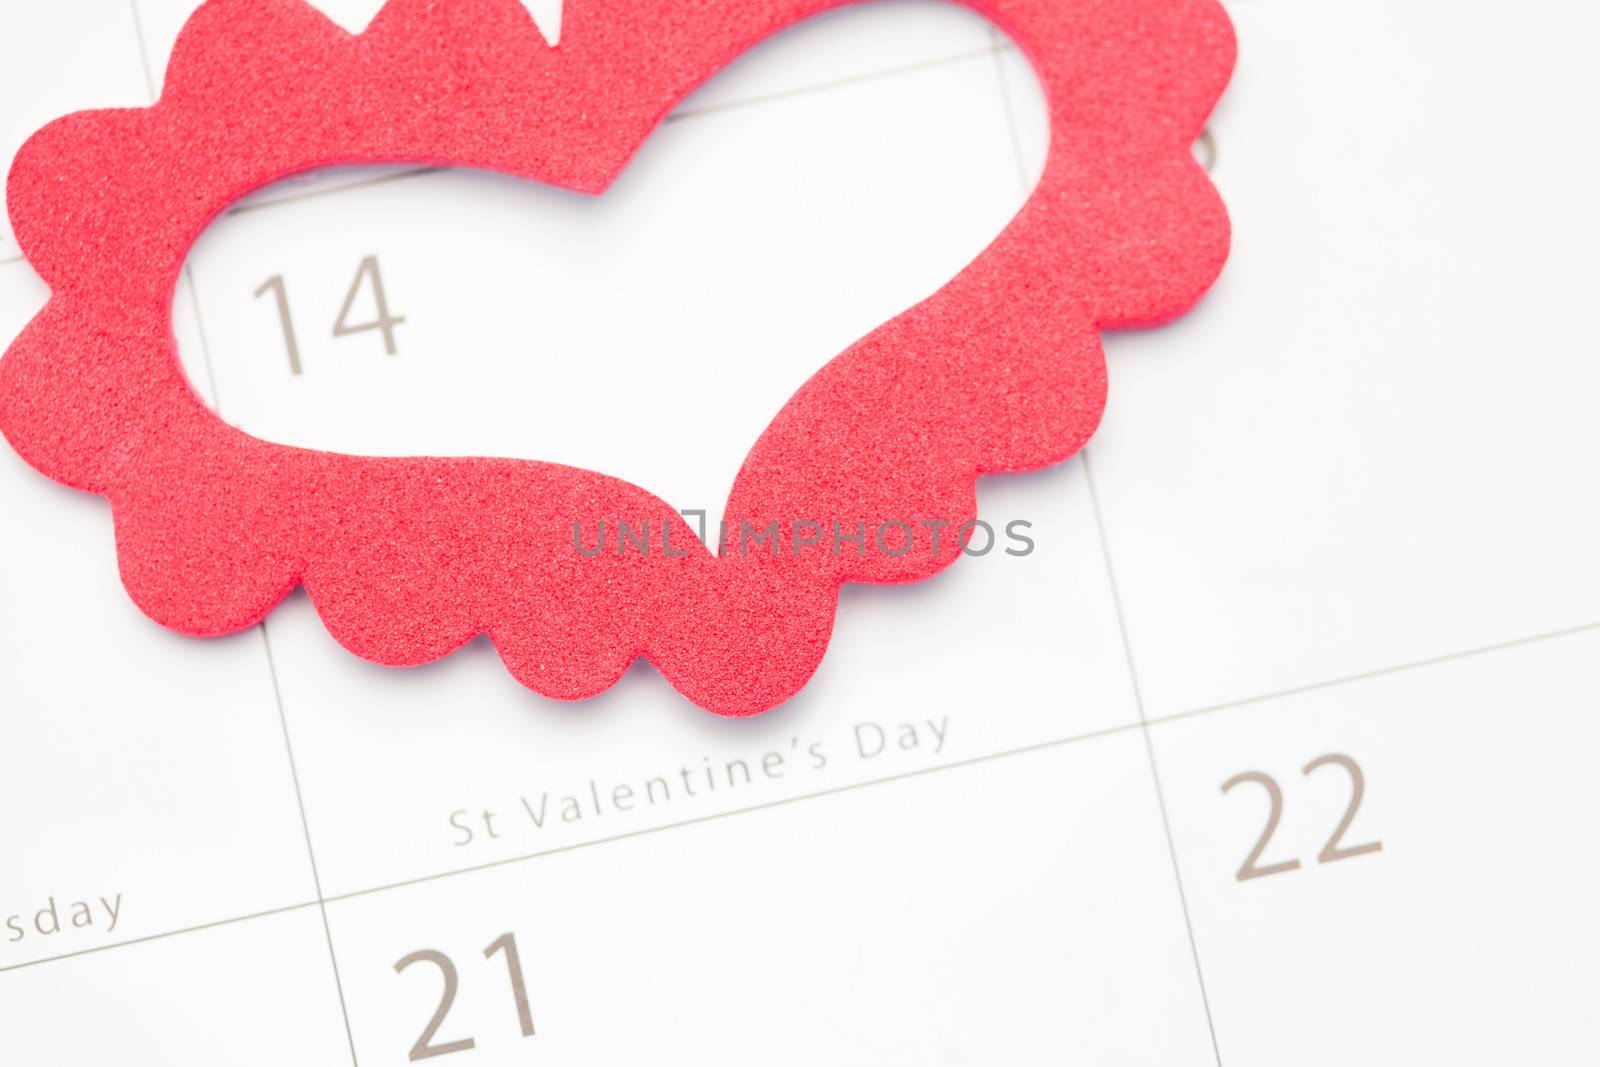 Pink heart marking out valentines day on calendar by Wavebreakmedia